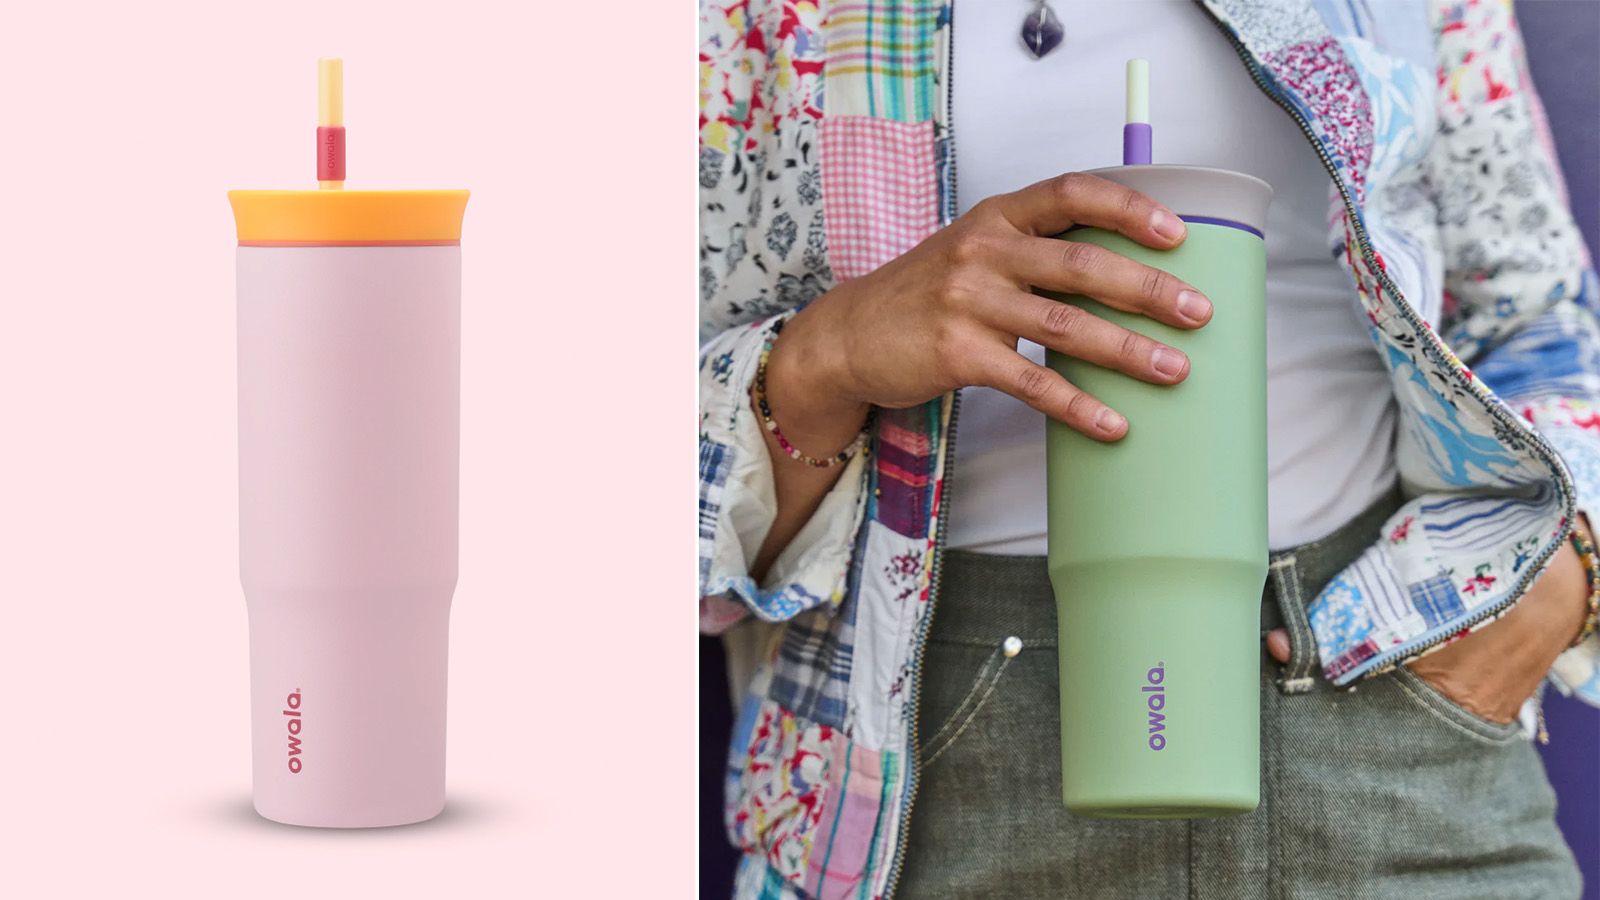 Product releases this week: Vuori, Le Creuset, Yeti and more